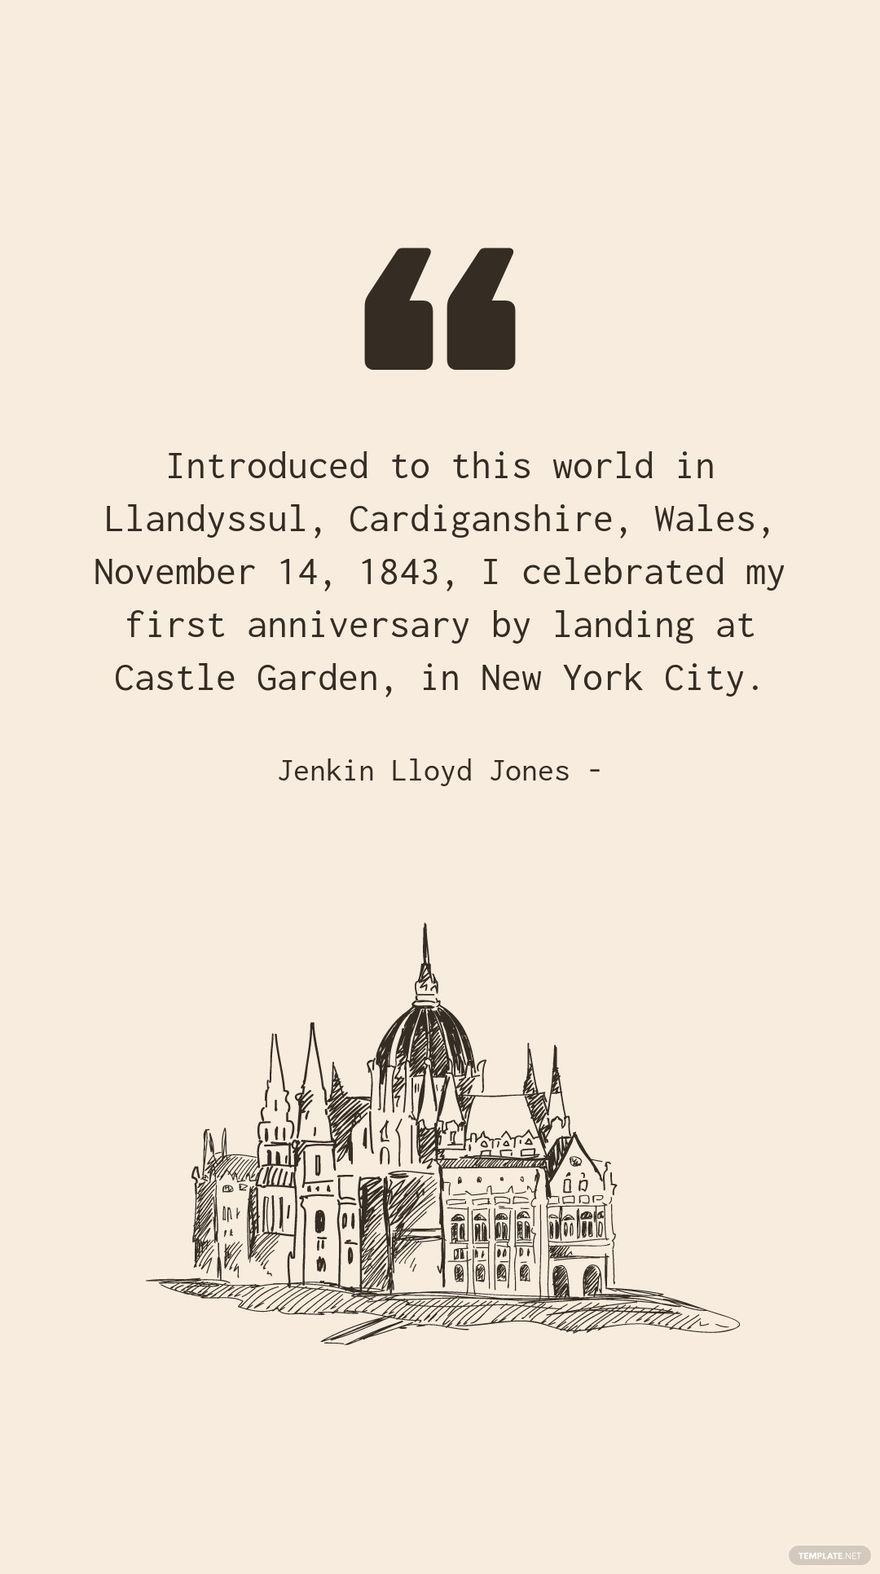 Jenkin Lloyd Jones - Introduced to this world in Llandyssul, Cardiganshire, Wales, November 14, 1843, I celebrated my first anniversary by landing at Castle Garden, in New York City.